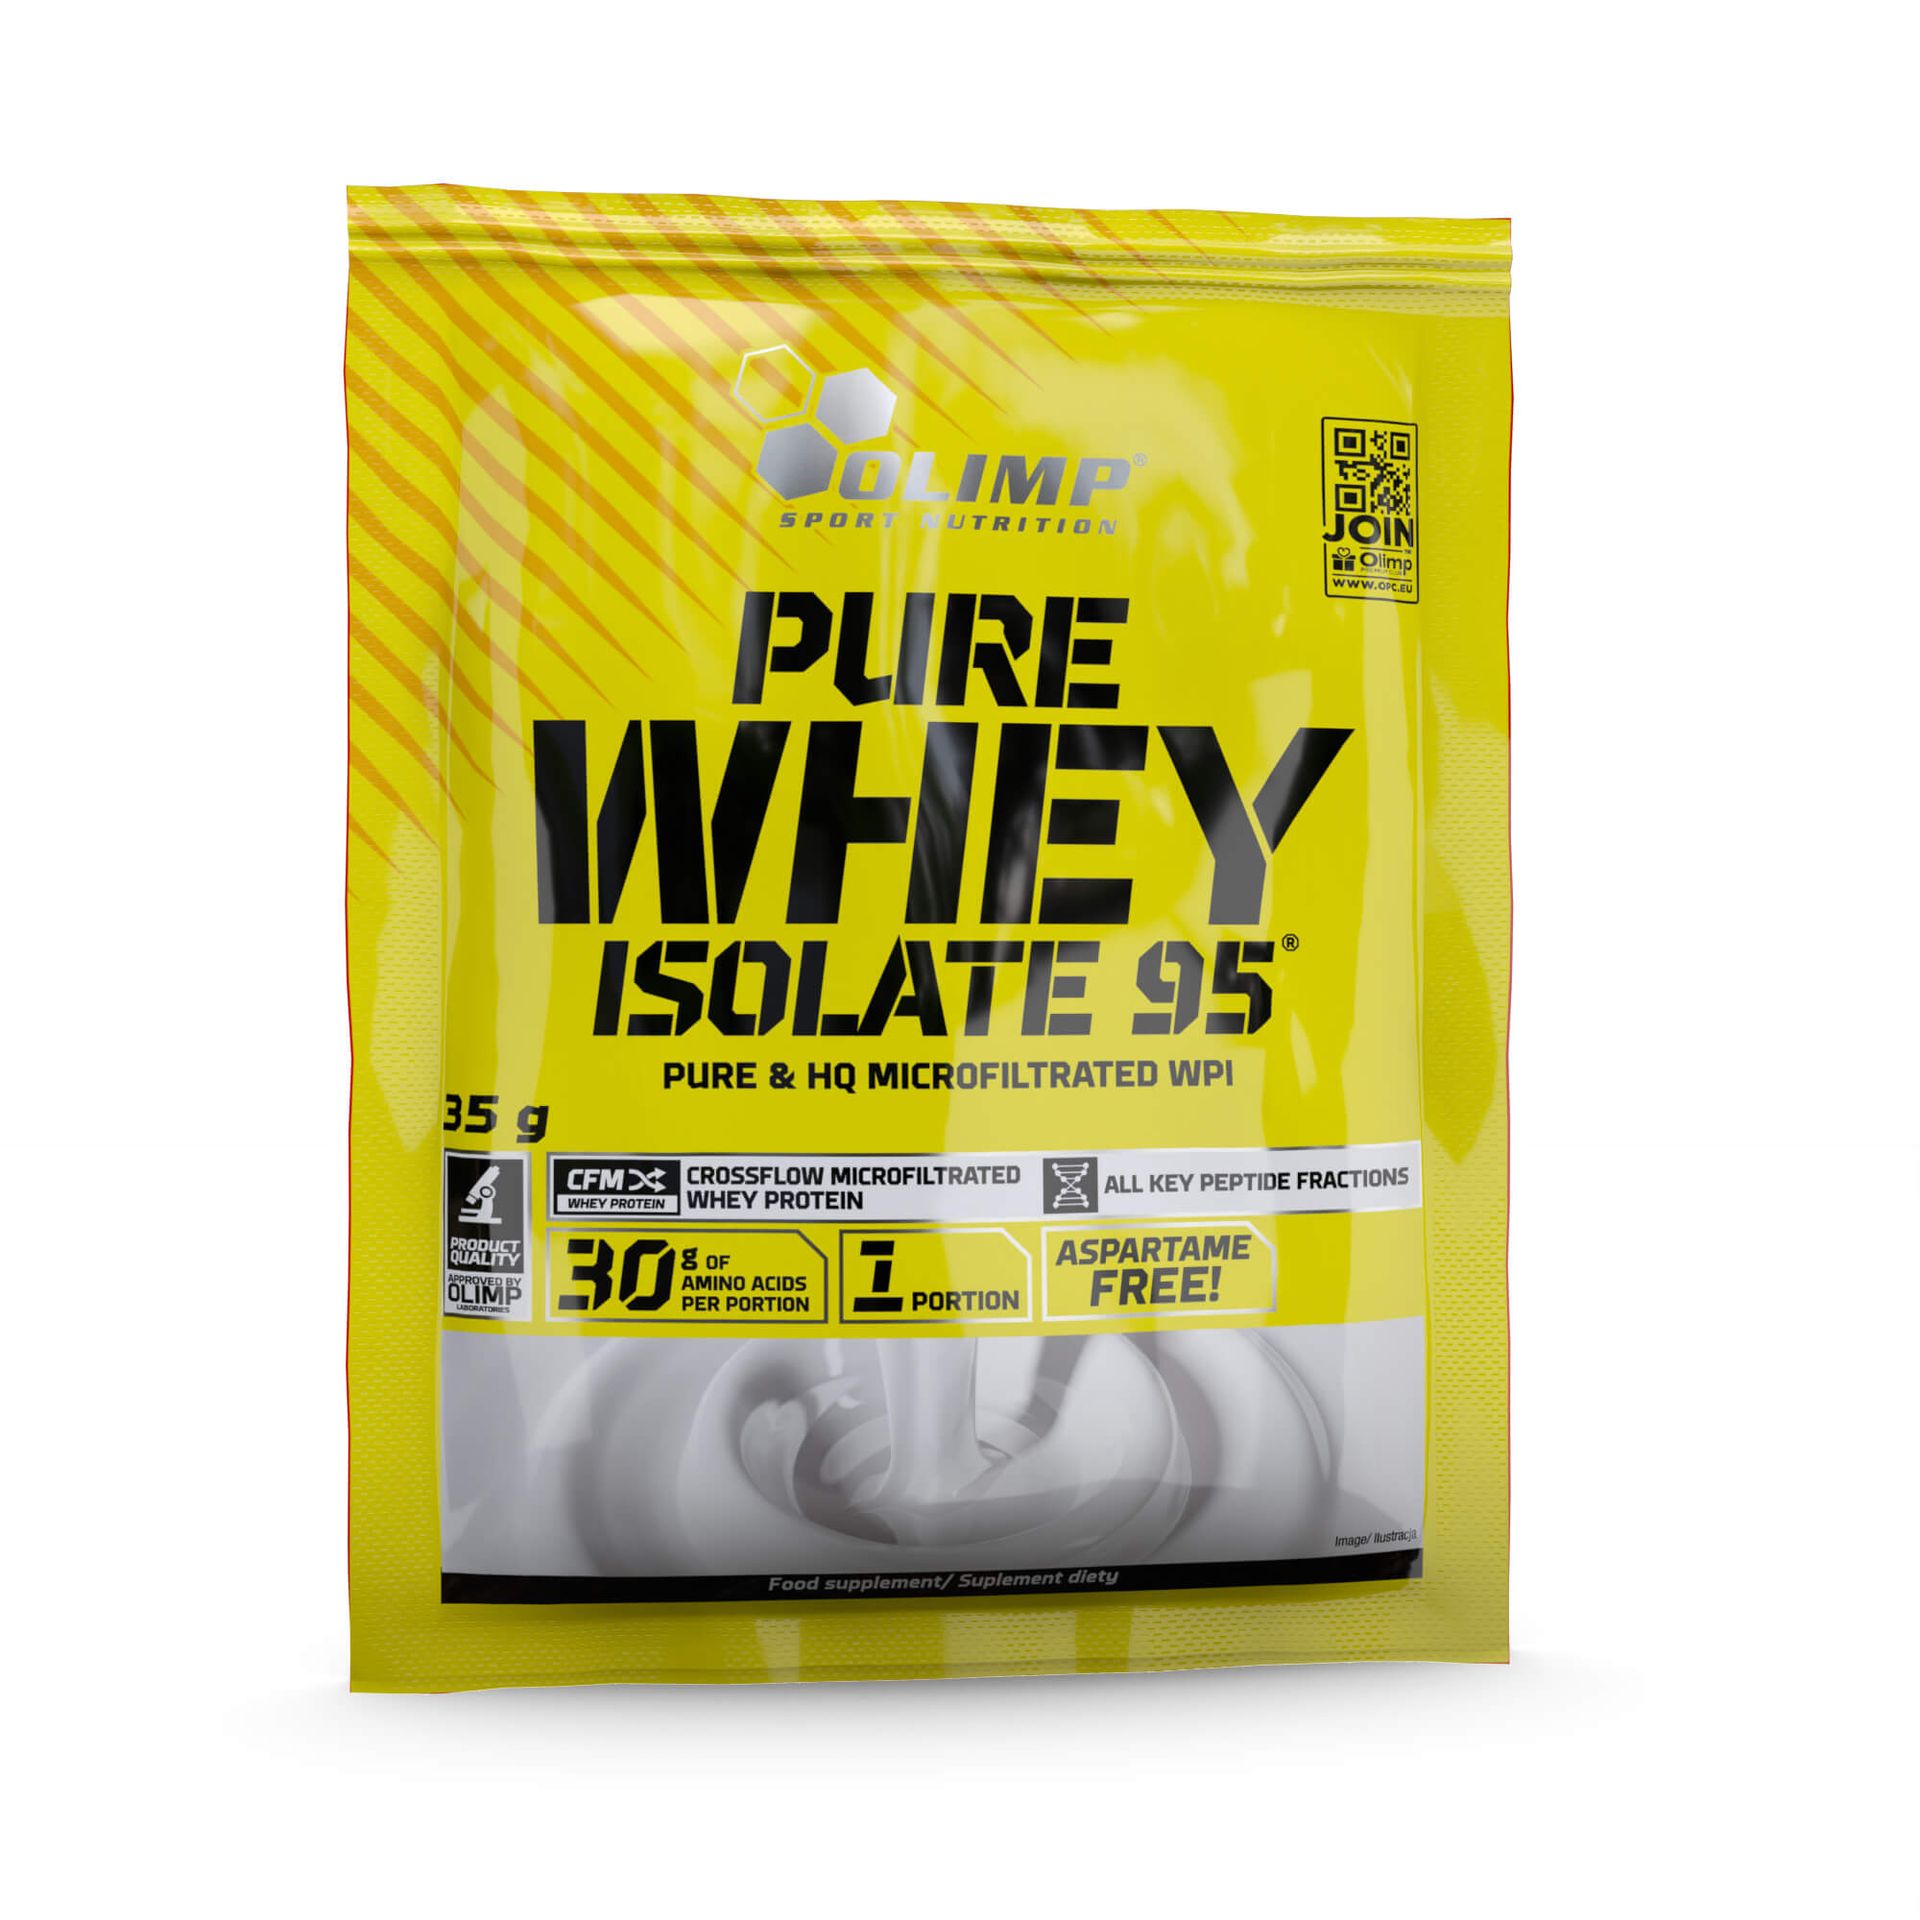 Olimp Pure Whey Isolate 95® - 35 g-Peanut Butter